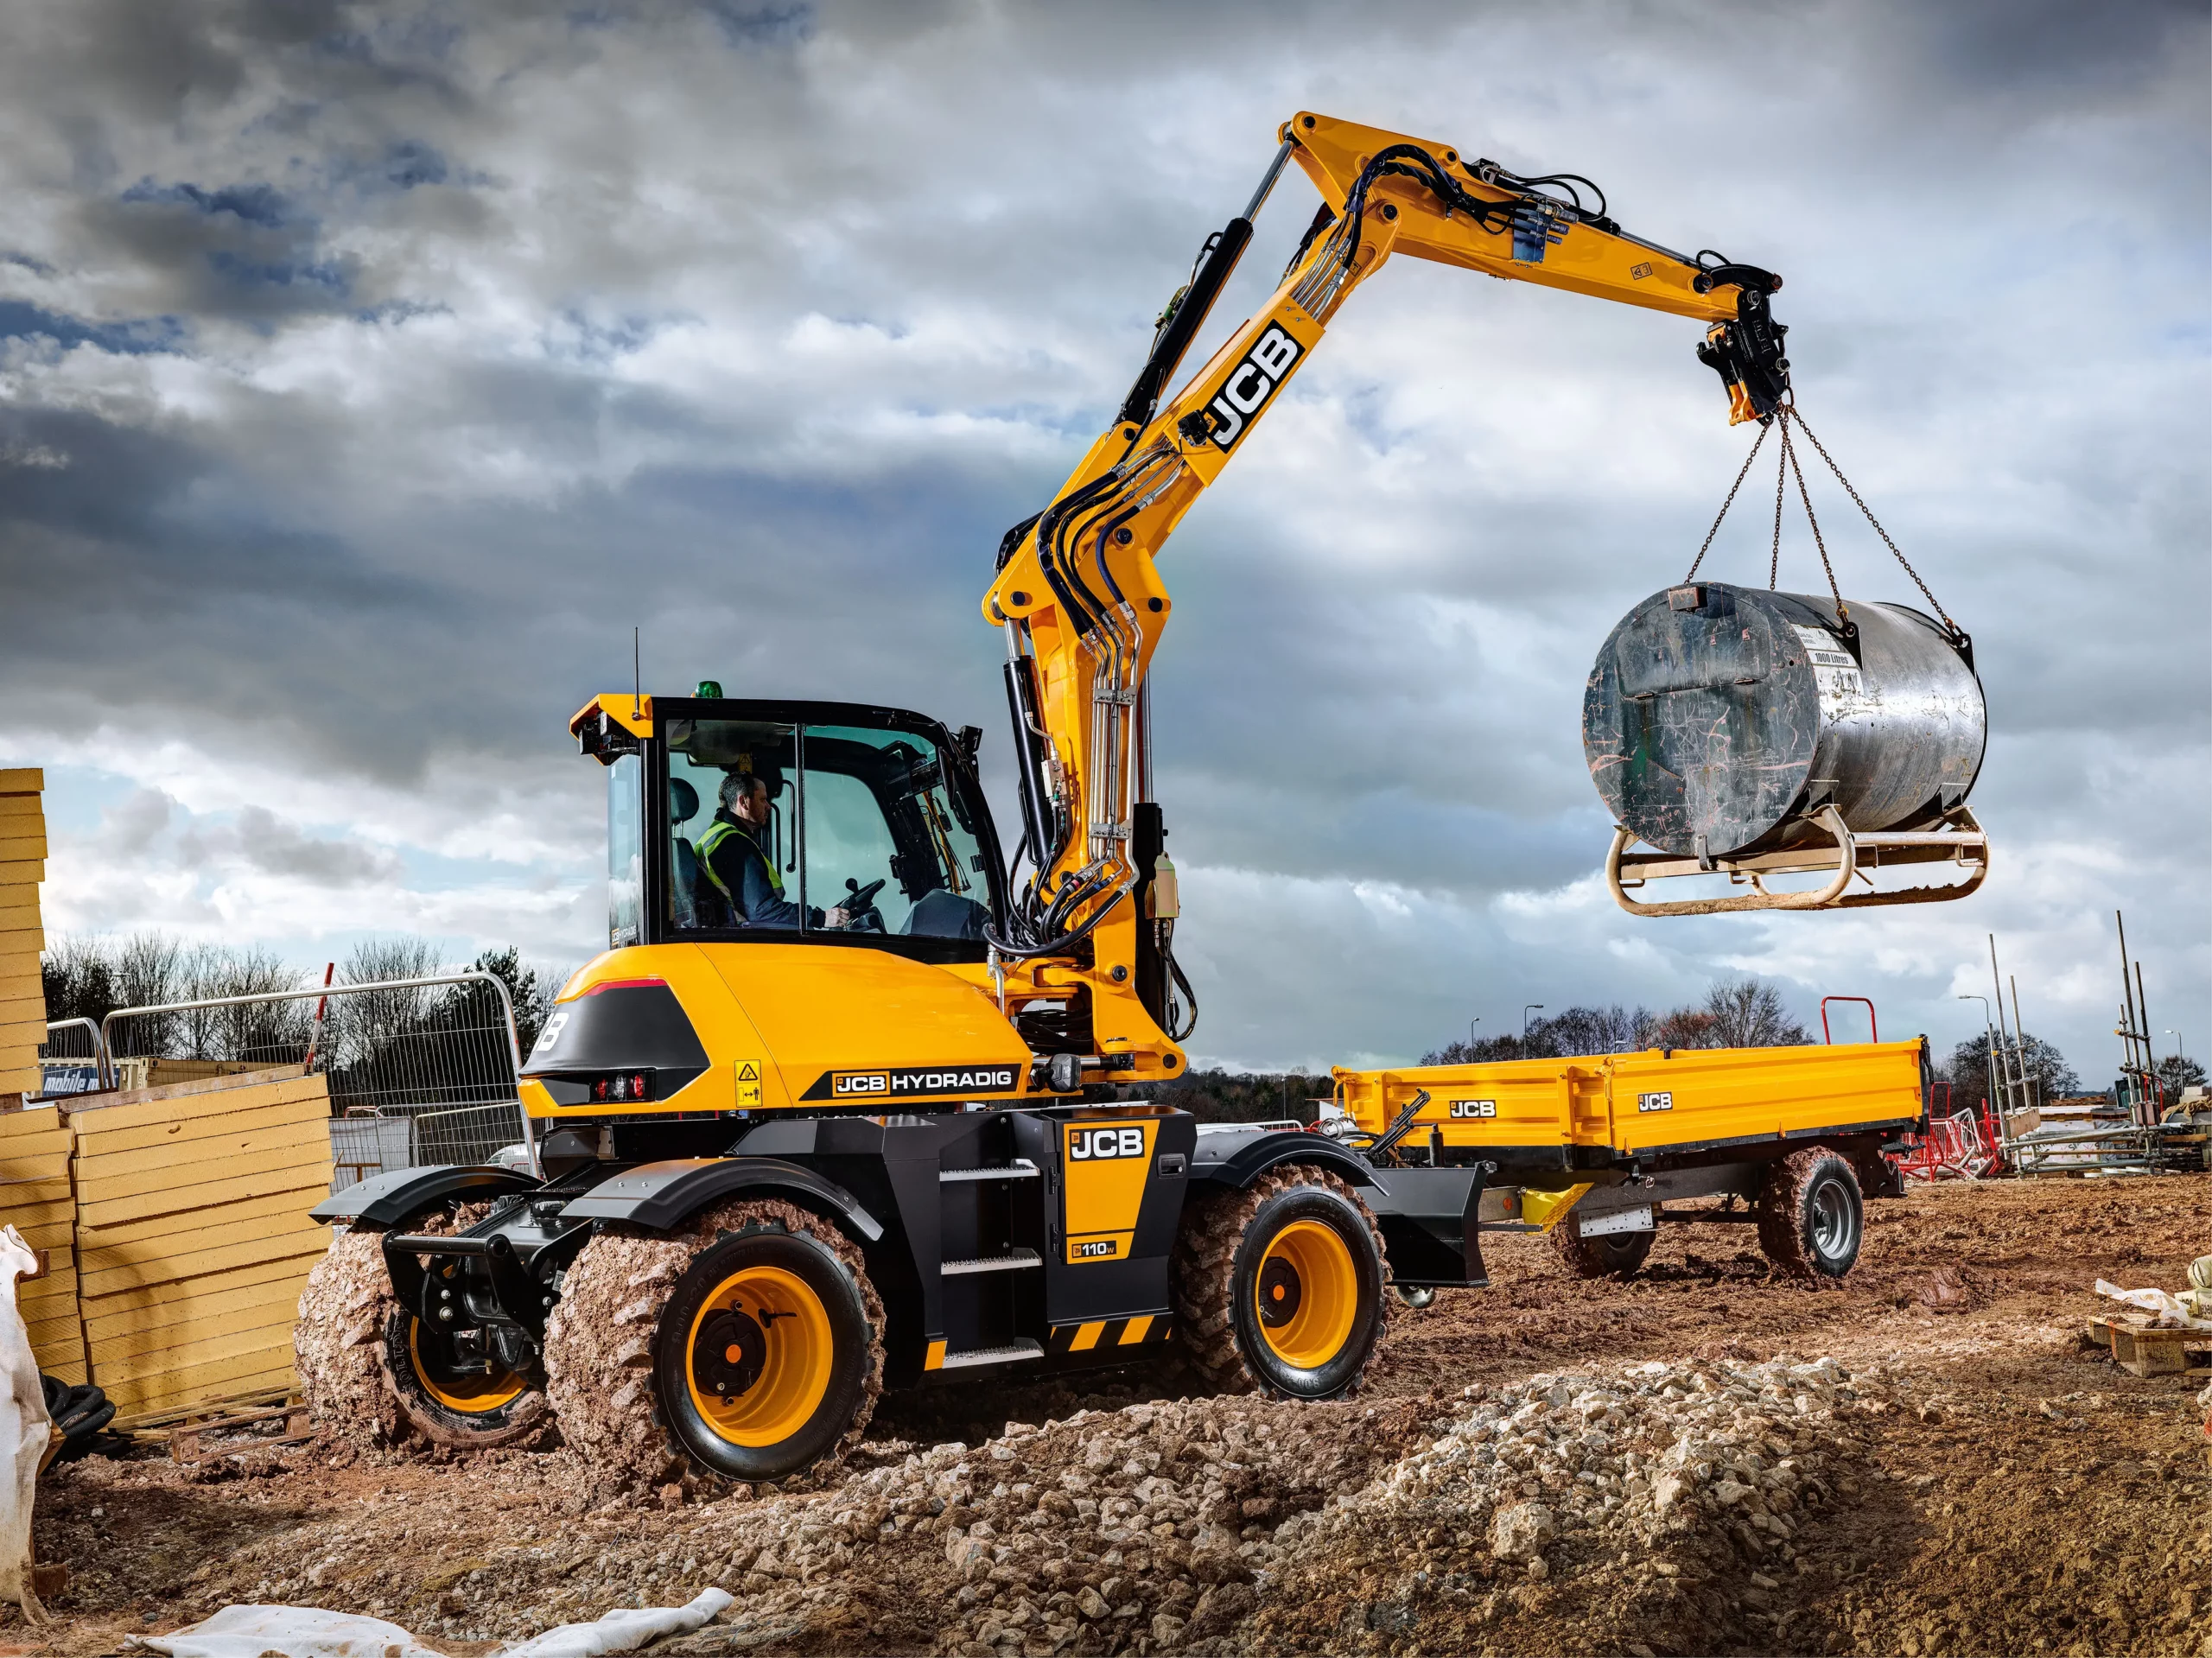 JCB hydradig lifting container